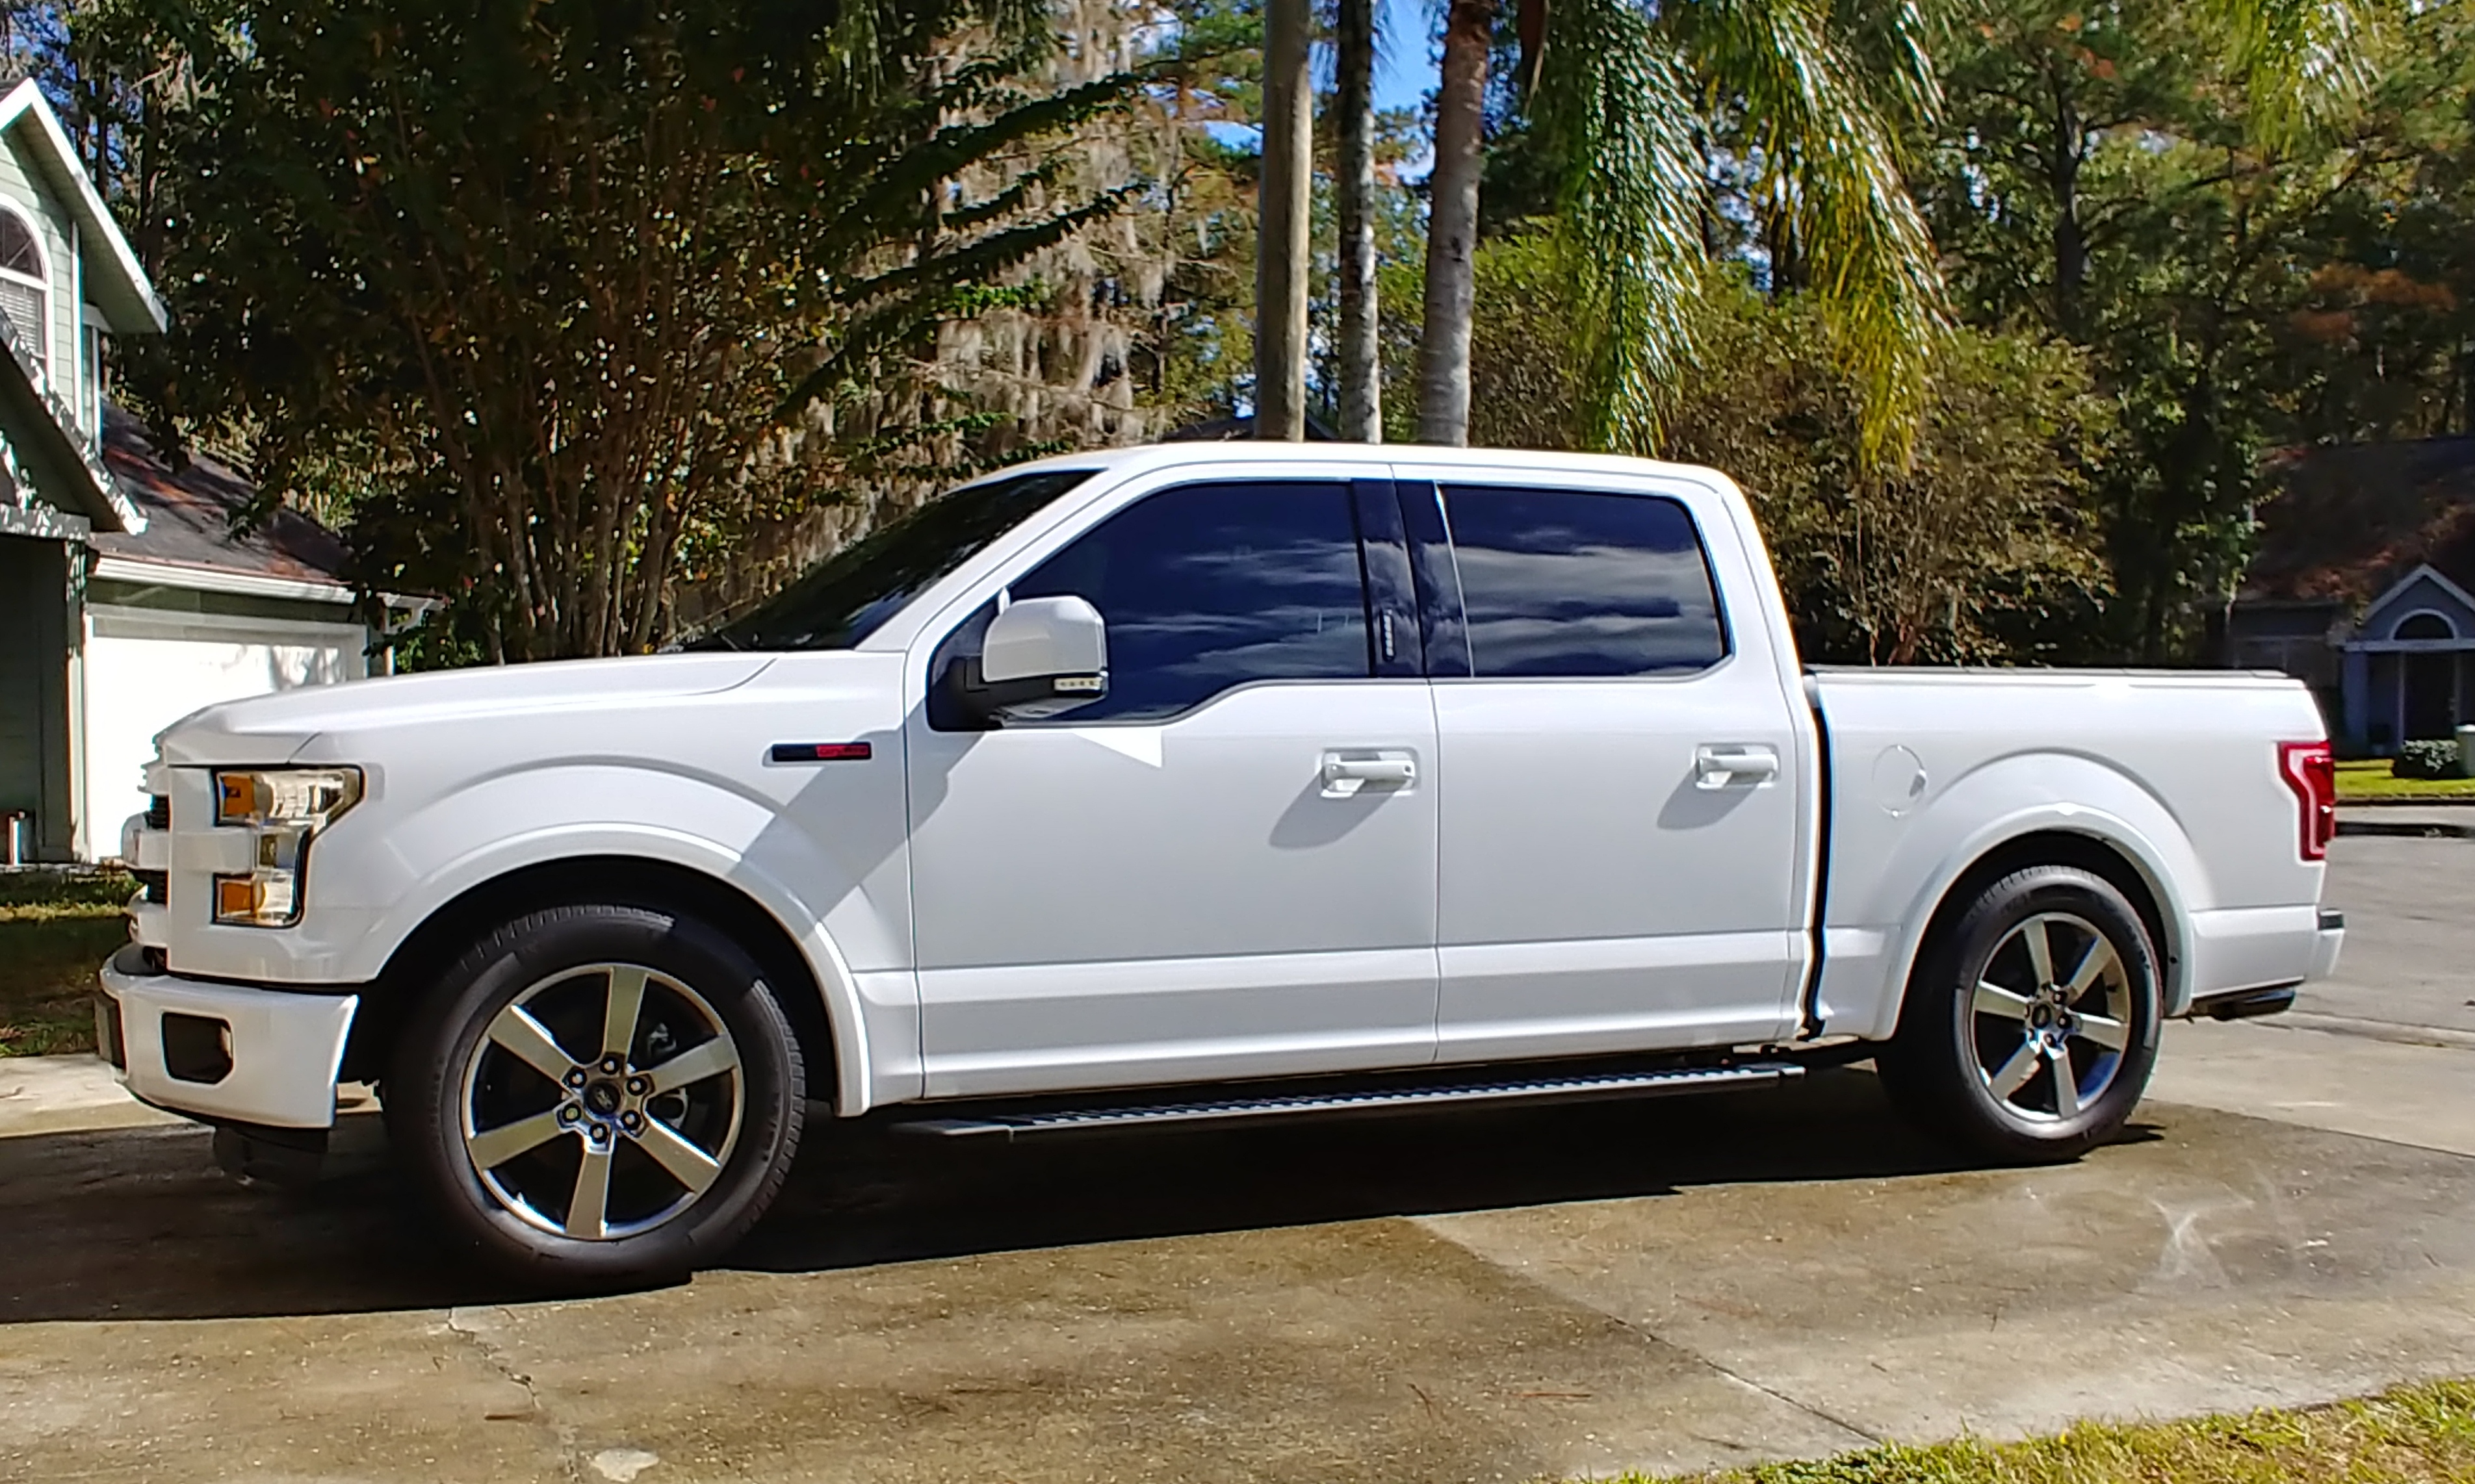 16 F150 Crewcab Short Bed Belltech 1001sp Lowering Kit Ford F150 Forum Community Of Ford Truck Fans